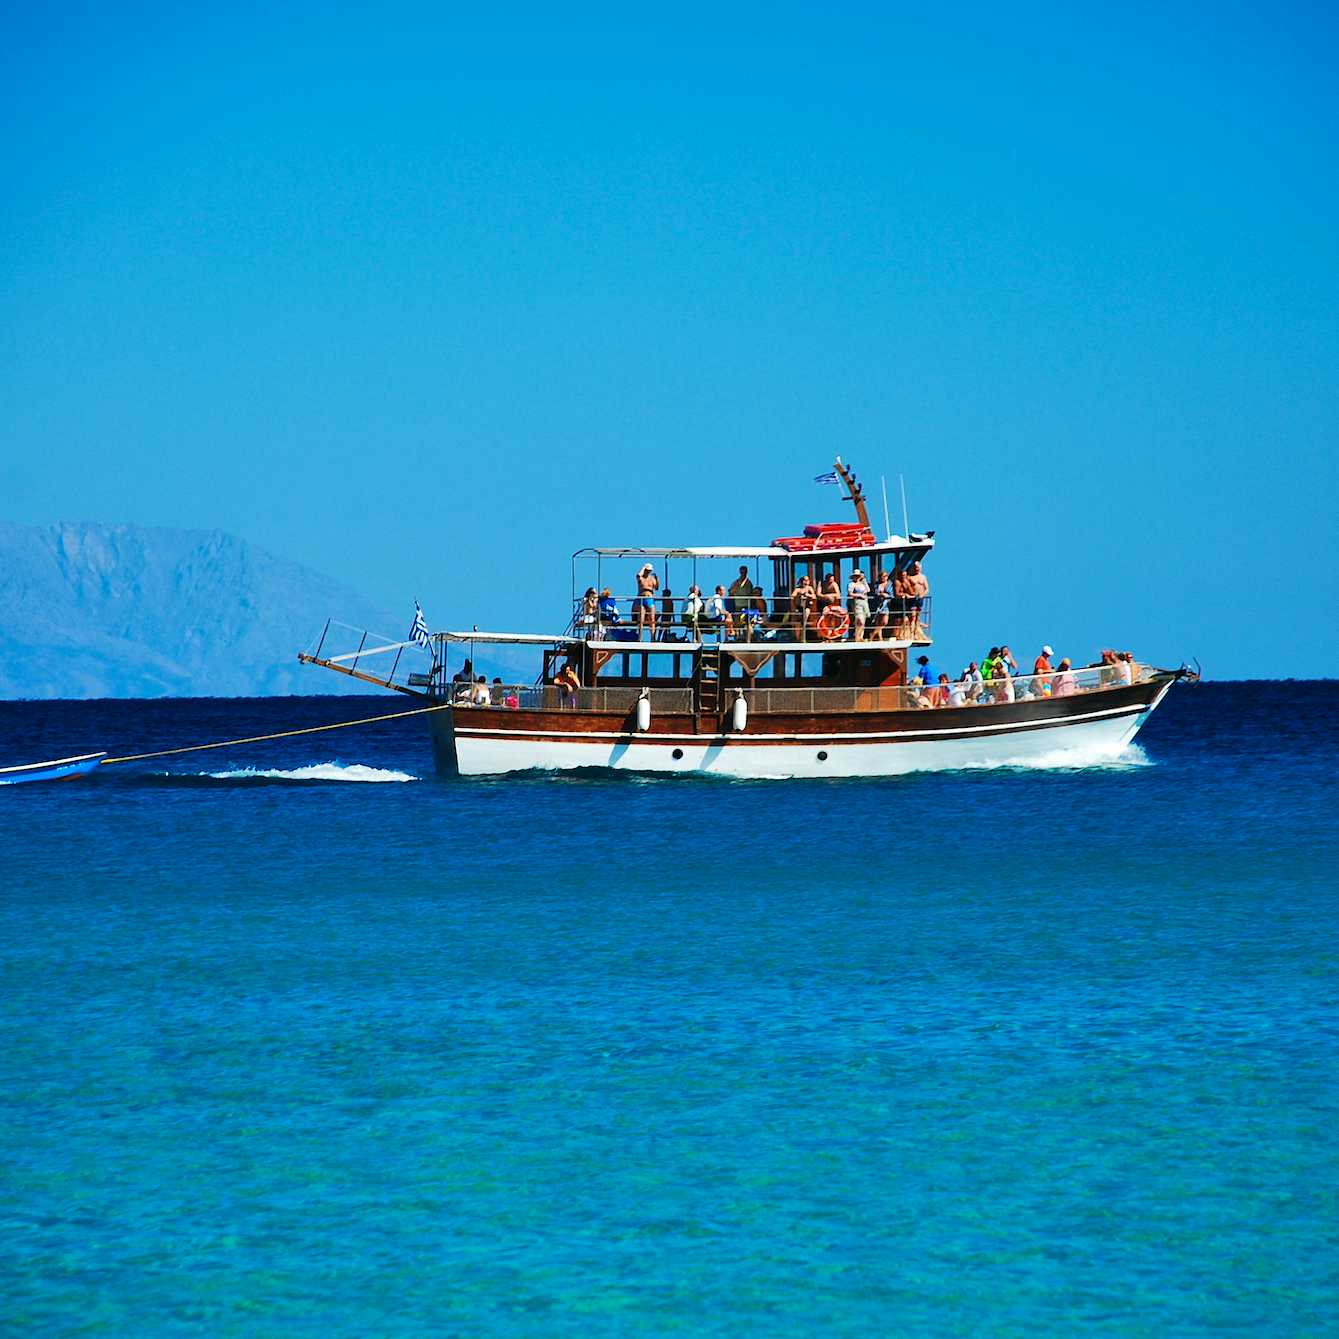 Photo Caption: Go on a day cruise across the beautiful bay